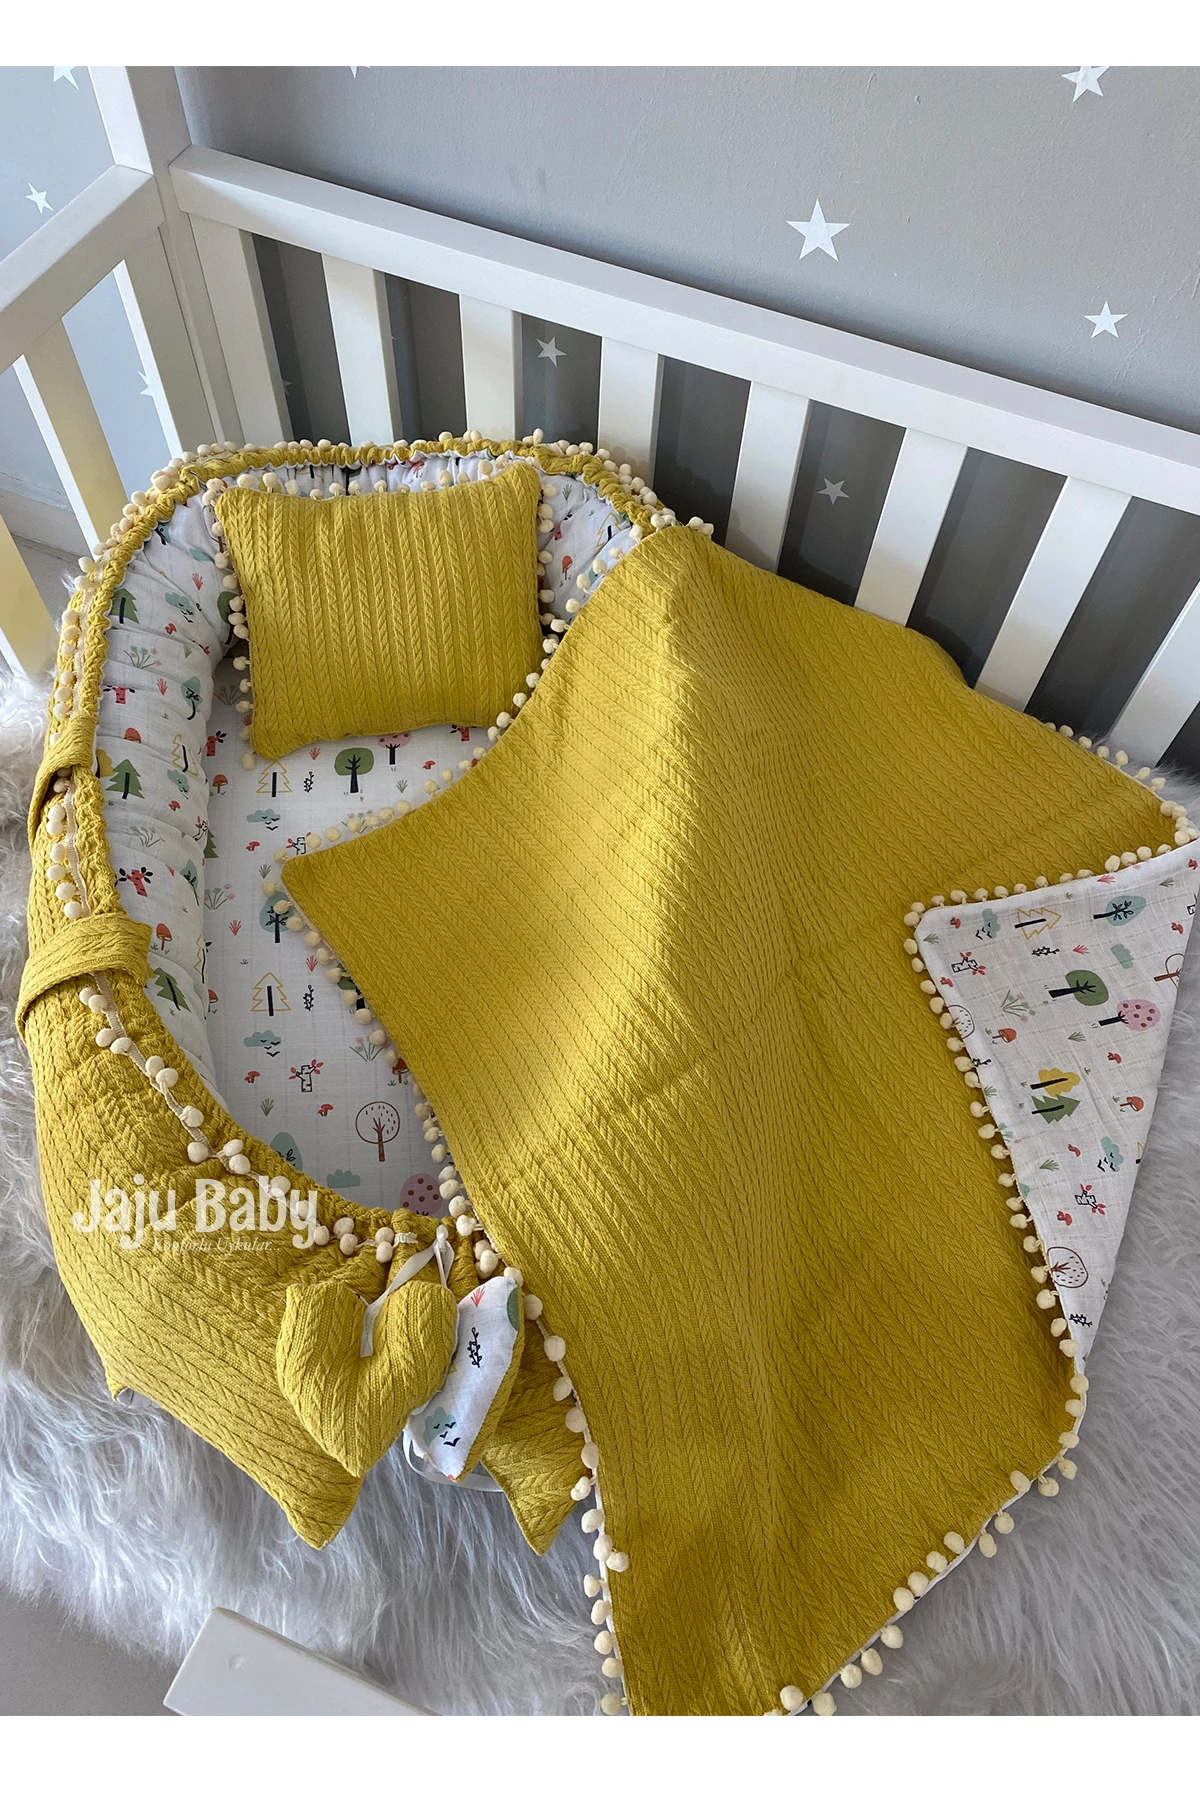 Jaju Baby Special Handmade Mustard Knit Pique Fabric and Muslin Fabric Pompon 3-Piece Babynest Set Mother Side Portable Baby Bed